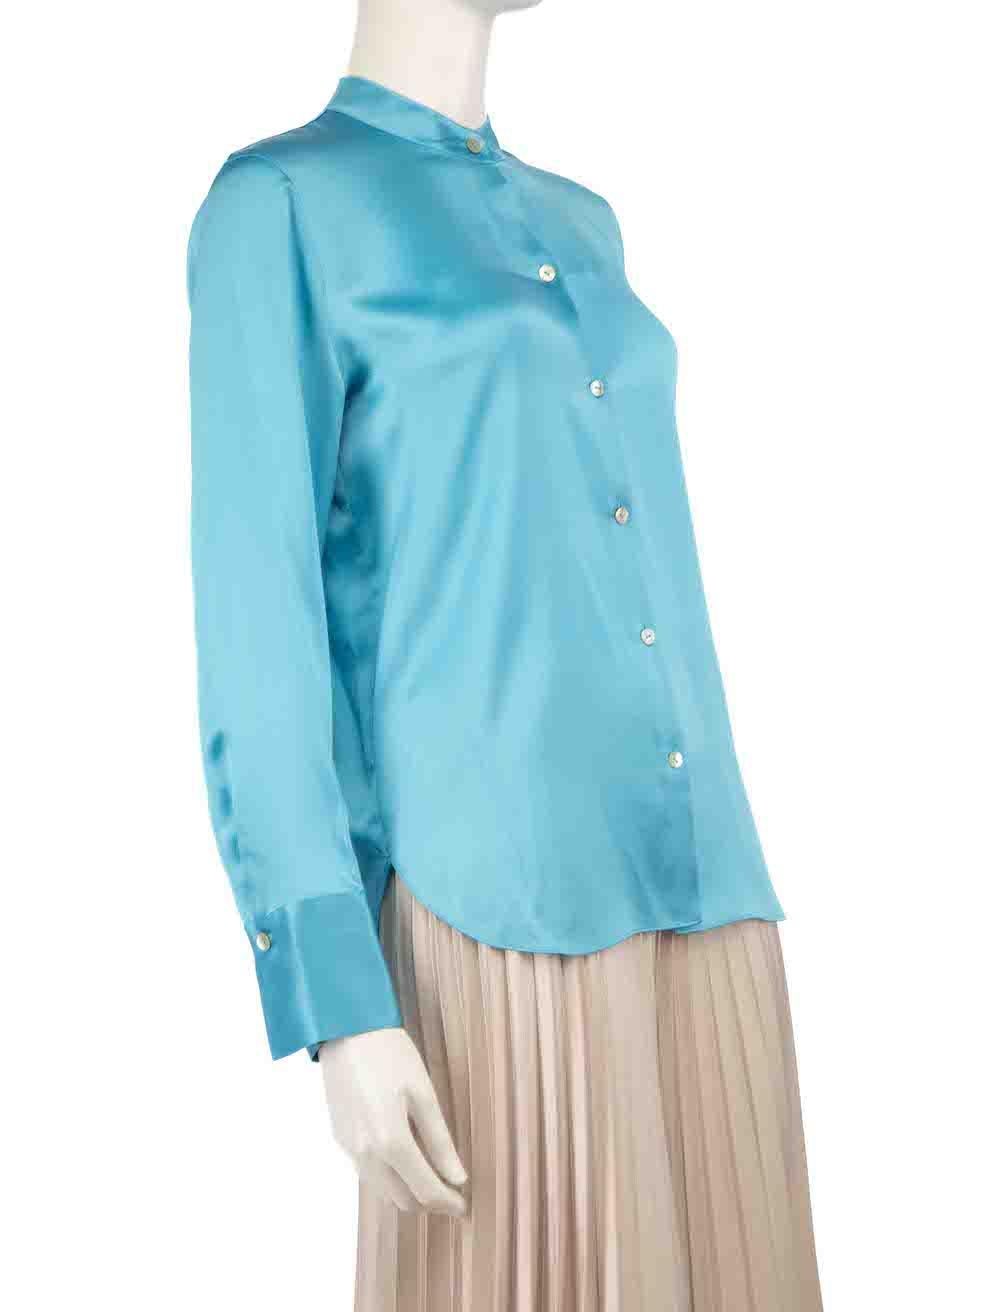 CONDITION is Never worn, with tags. No visible wear to blouse is evident on this new Vince designer resale item.
 
 
 
 Details
 
 
 Blue
 
 Silk
 
 Blouse
 
 Long sleeves
 
 Button up fastening
 
 Buttoned cuffs
 
 Round neck
 
 
 
 
 
 Made in